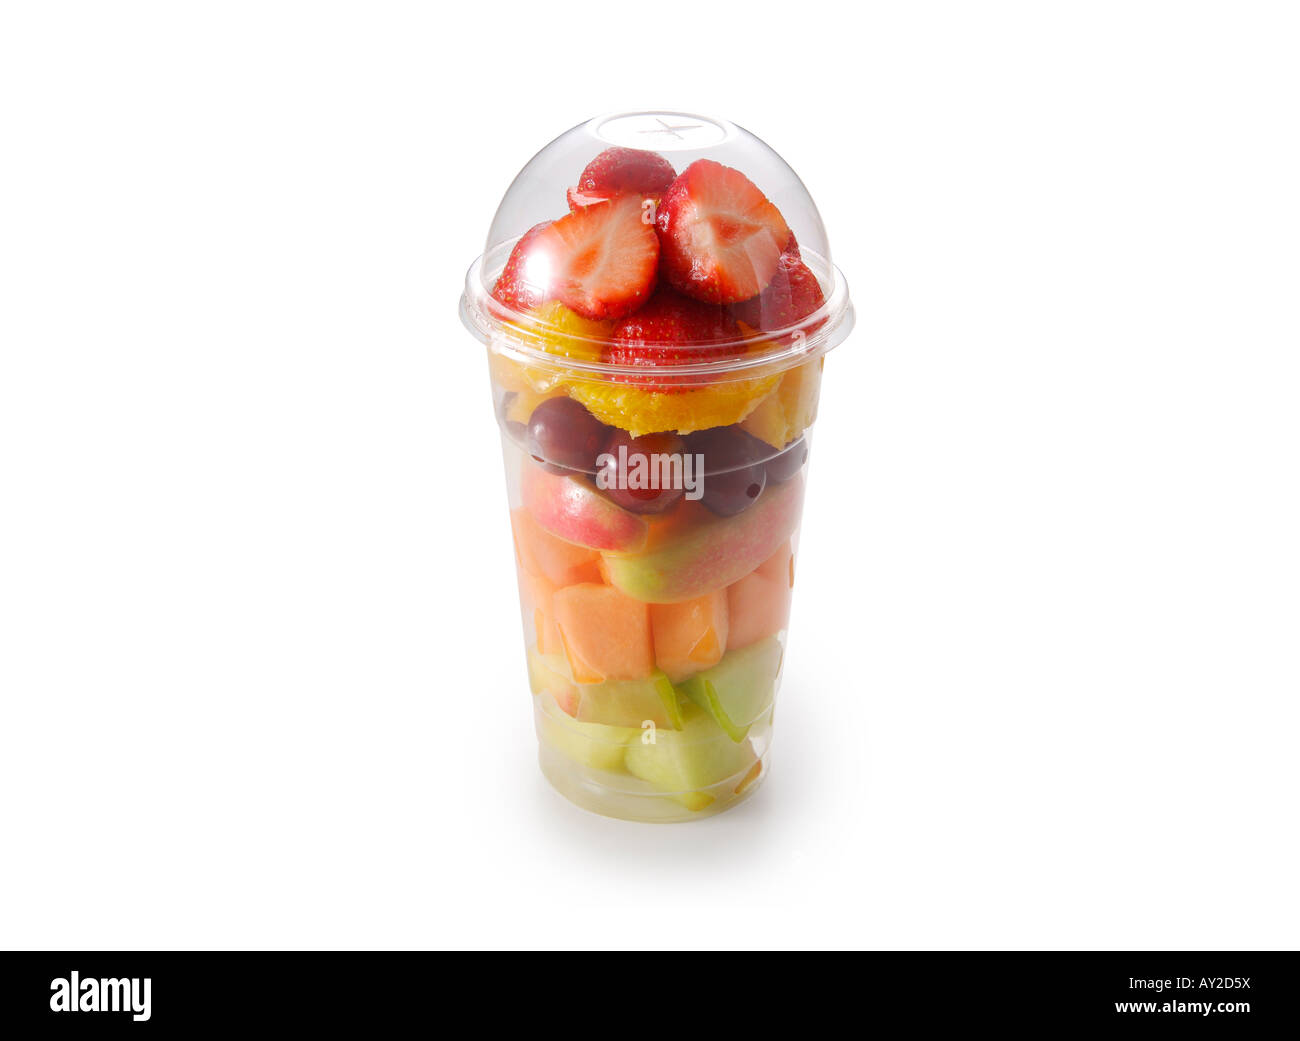 Mixed fruit in cut, shot on white Stock Photo